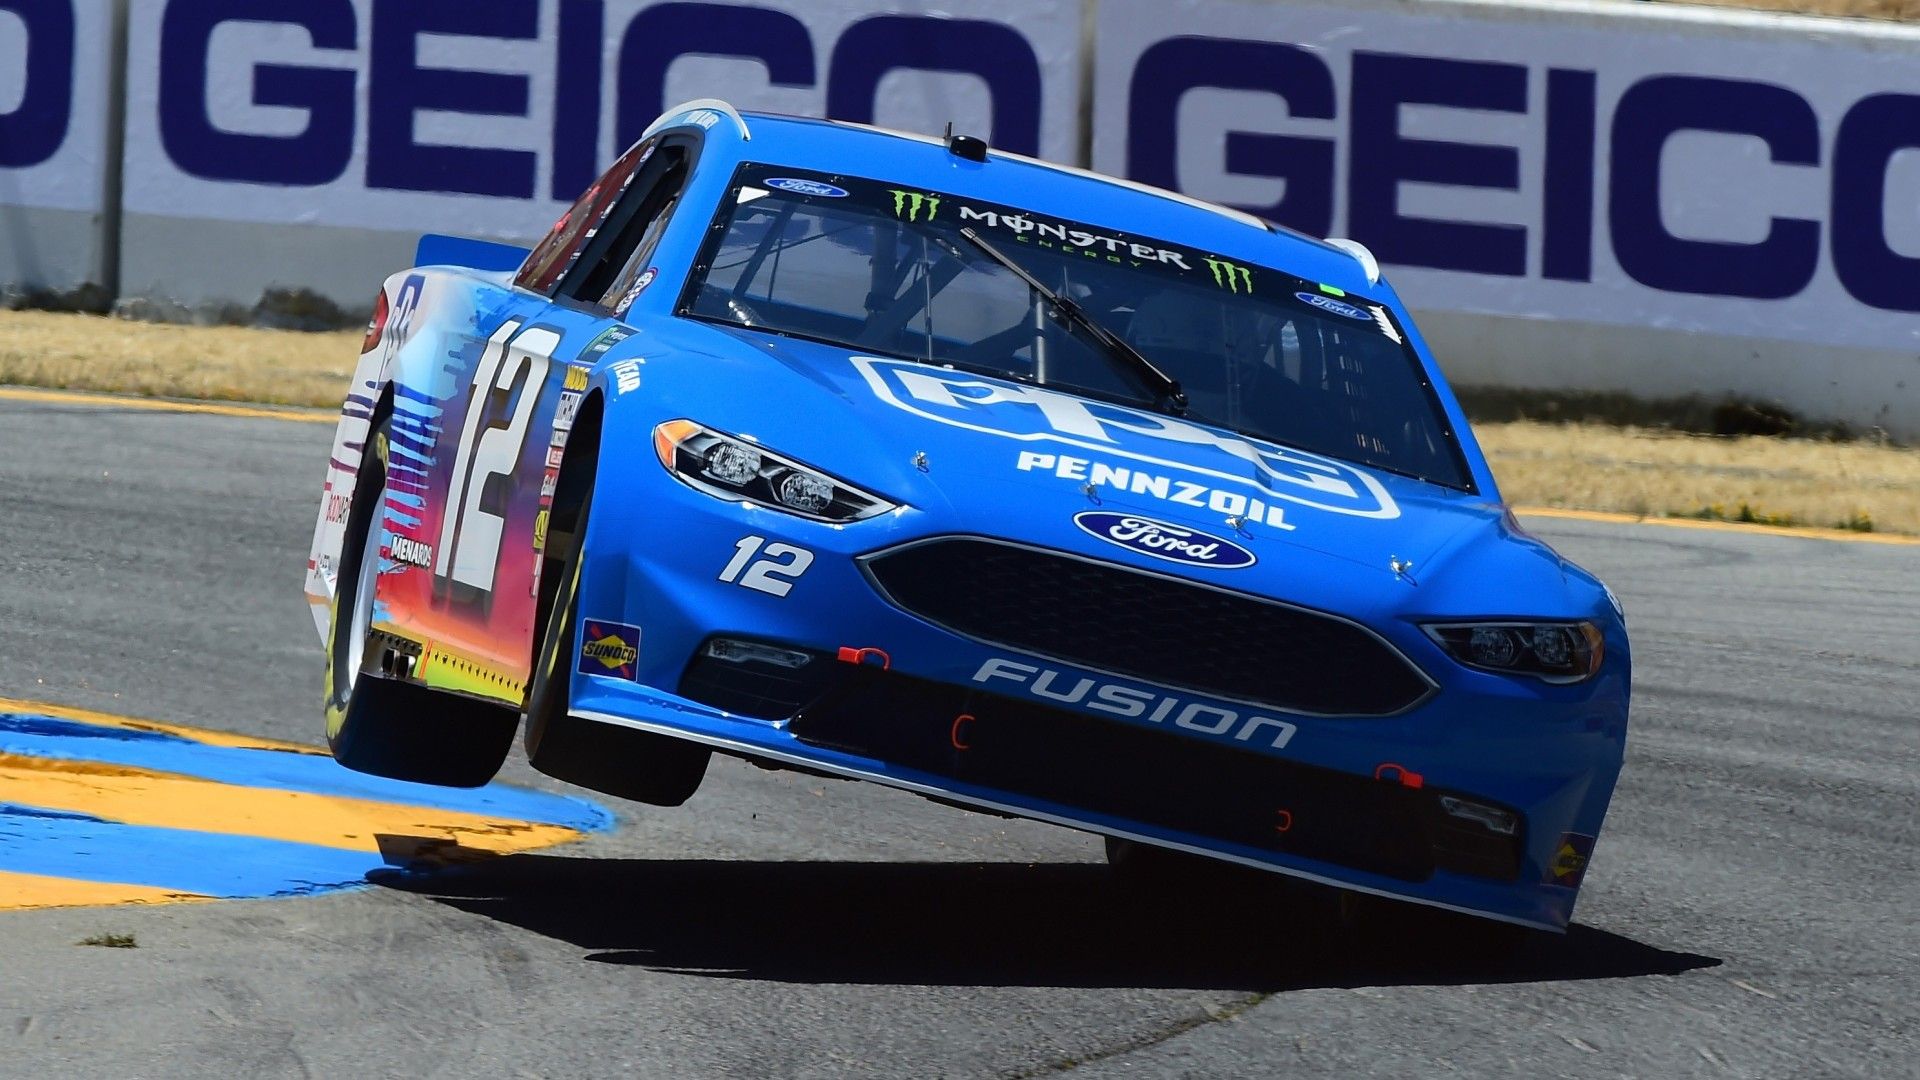 NASCAR: Ryan Blaney loses power steering, stays on course to finish 34th